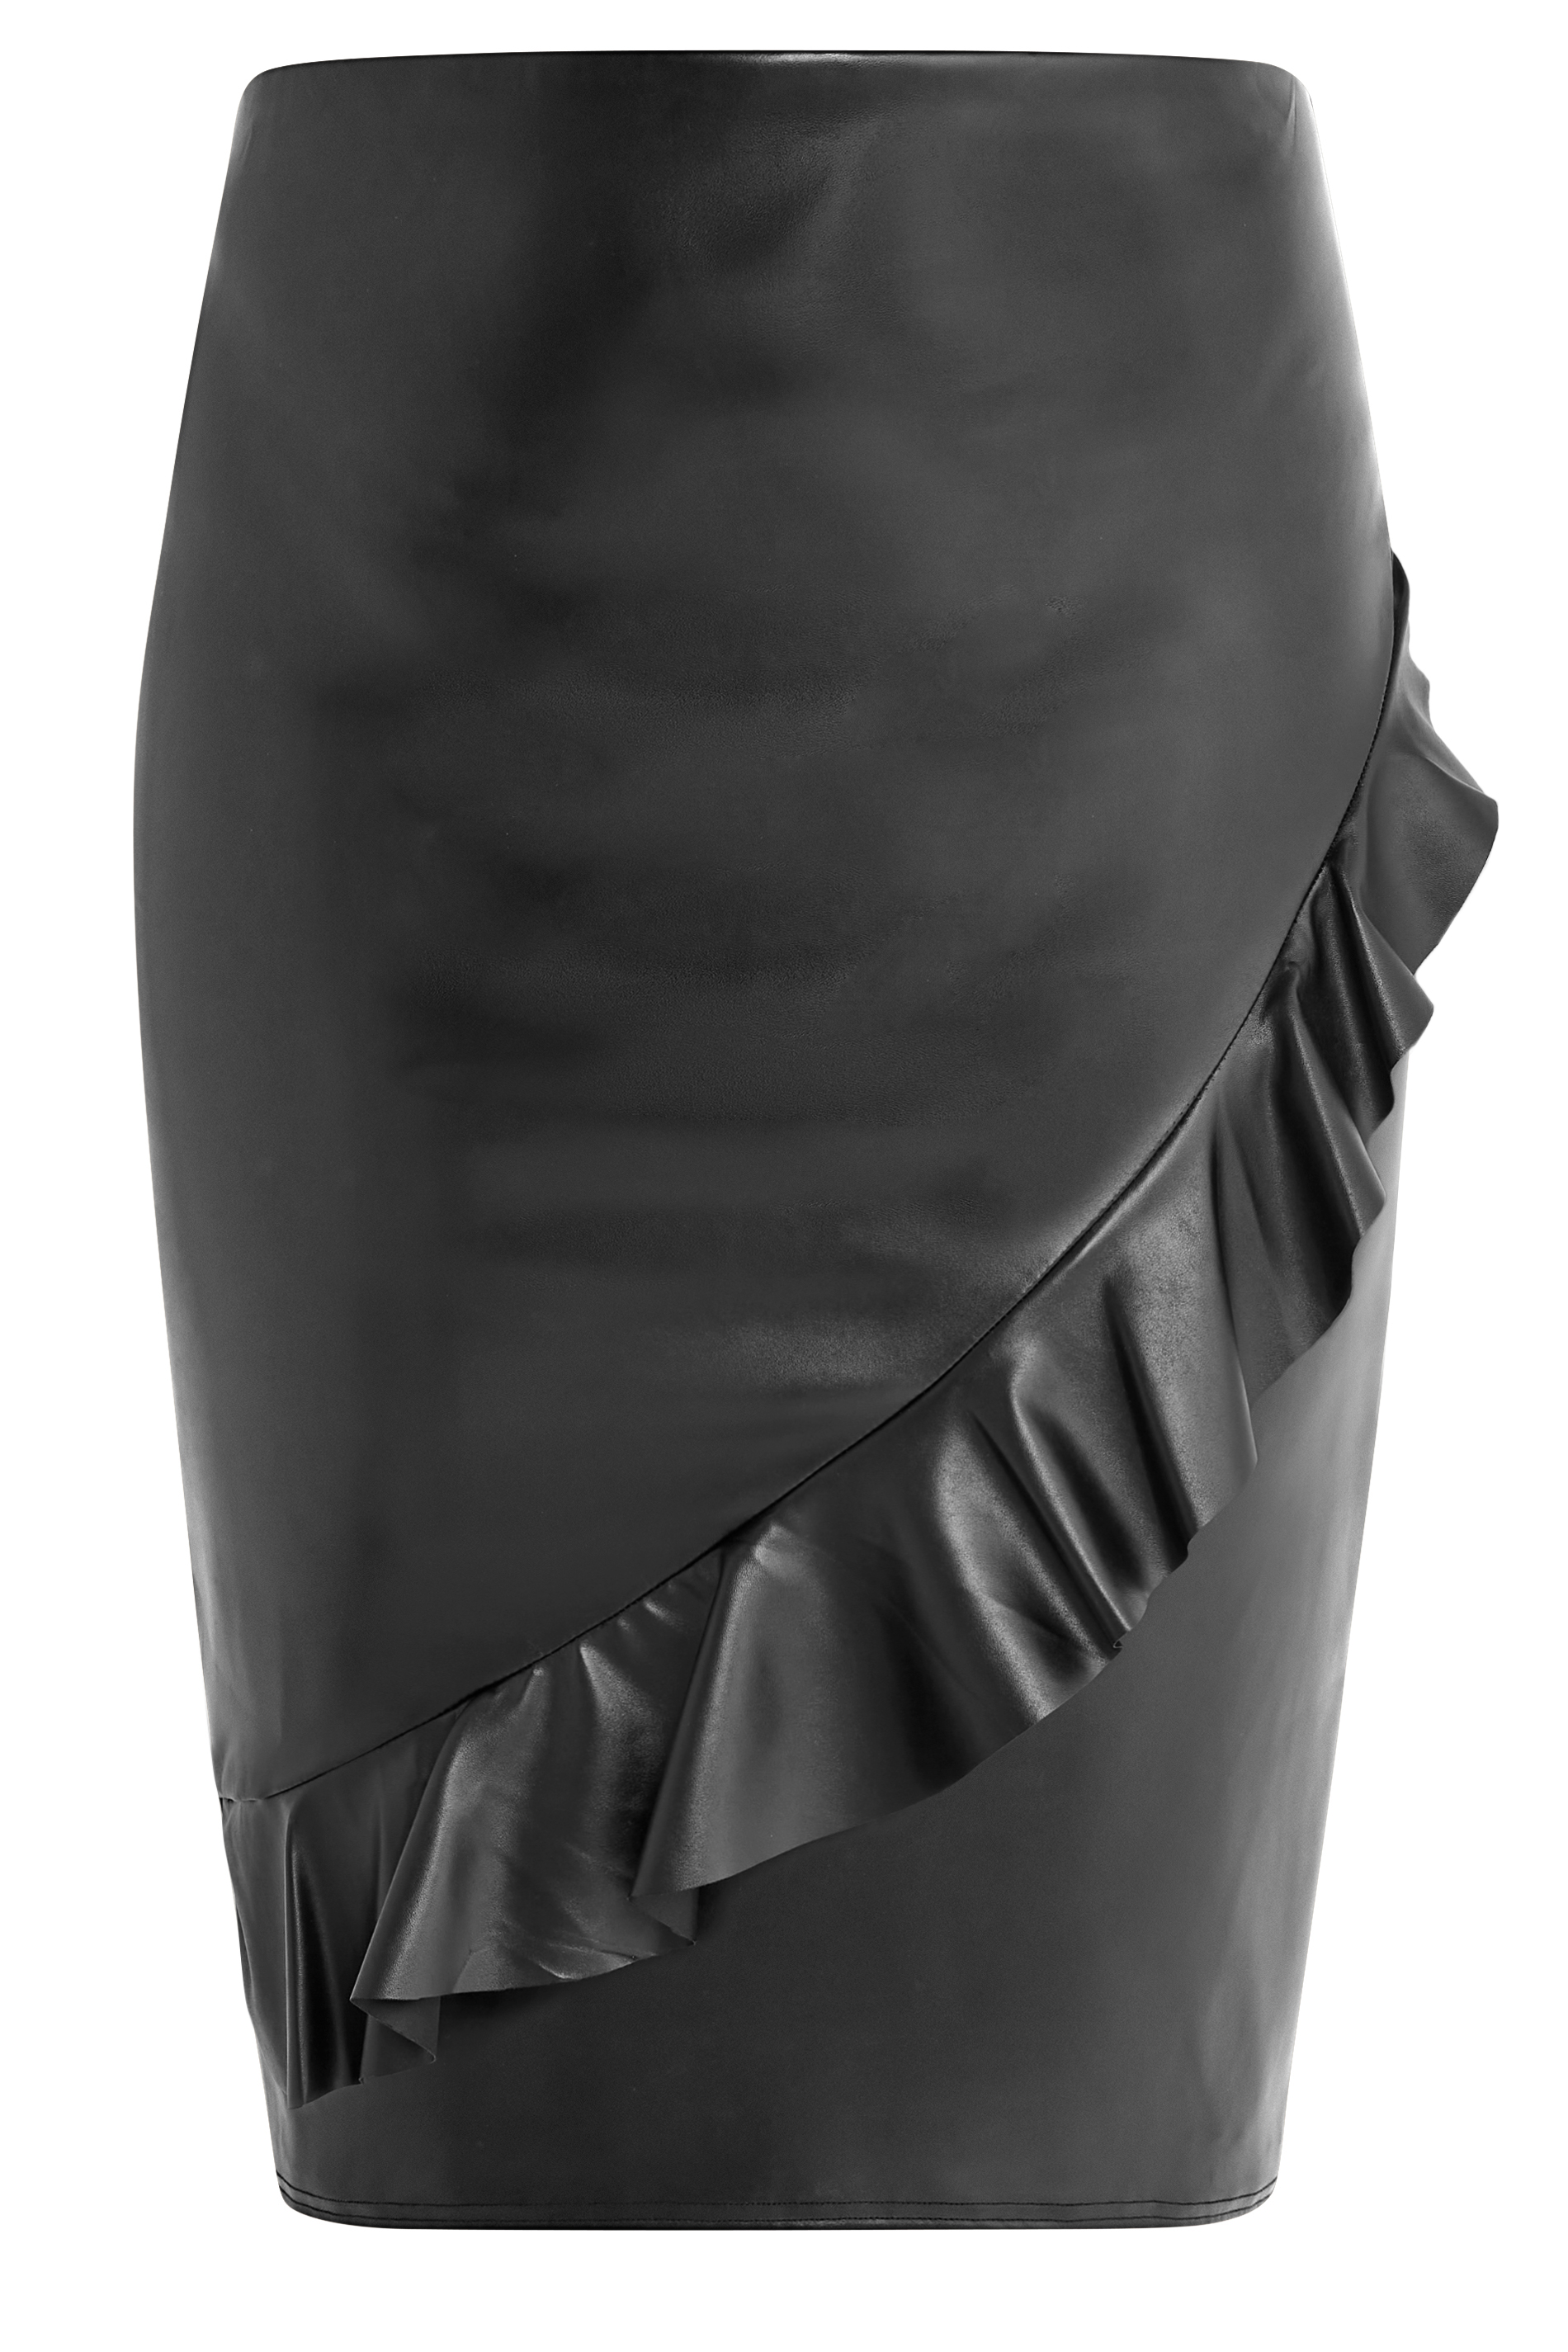 YOURS LONDON Plus Size Black Ruffle Leather Look Skirt | Yours Clothing 3